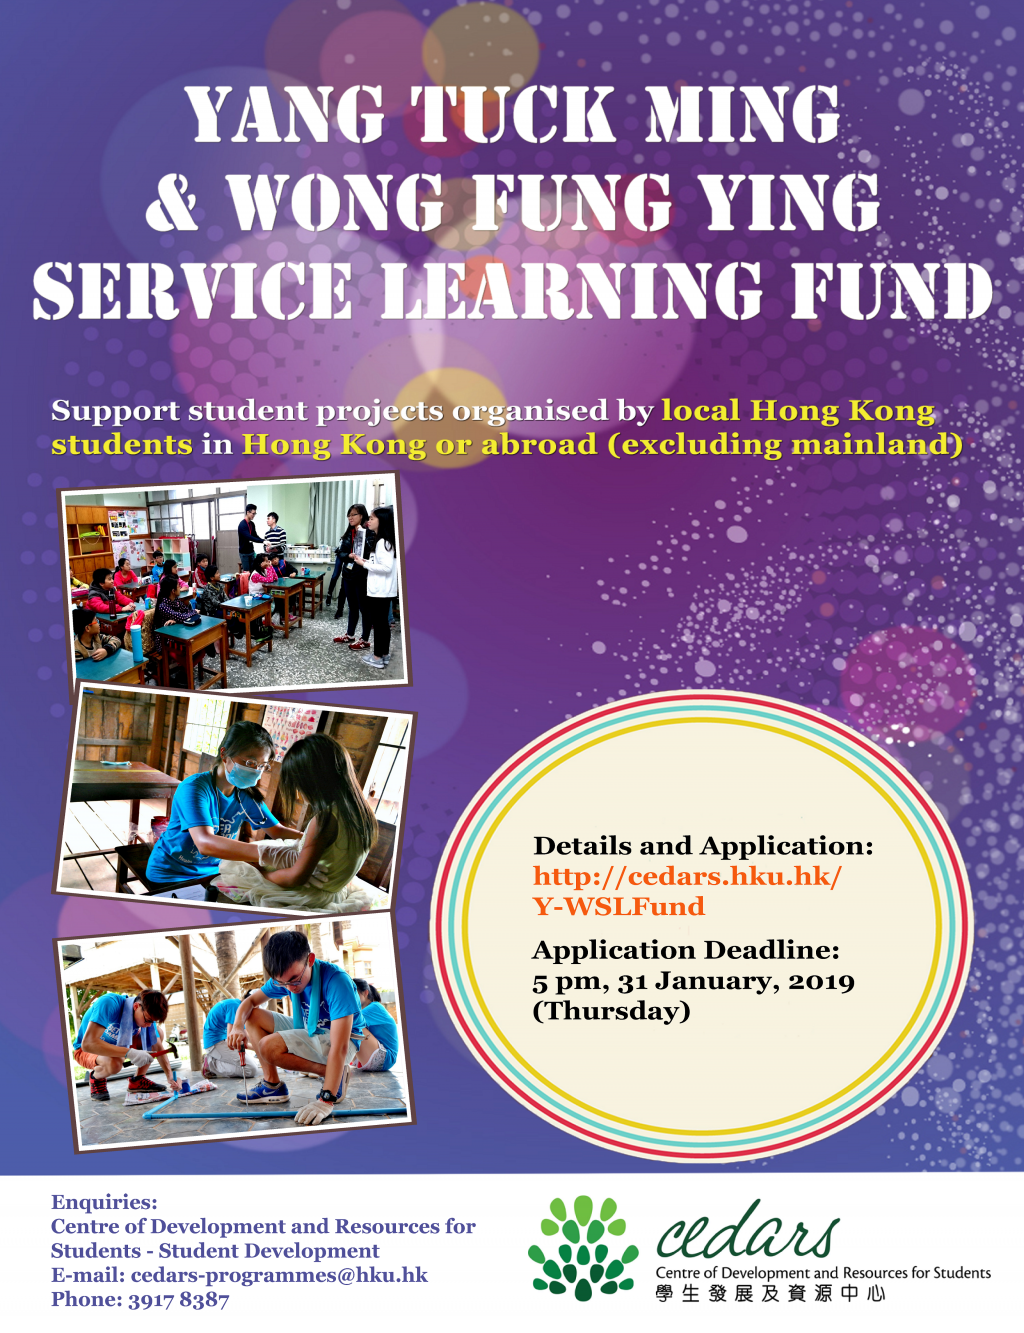 Apply Now: Yang Tuck Ming & Wong Fung Ying Service Learning Fund